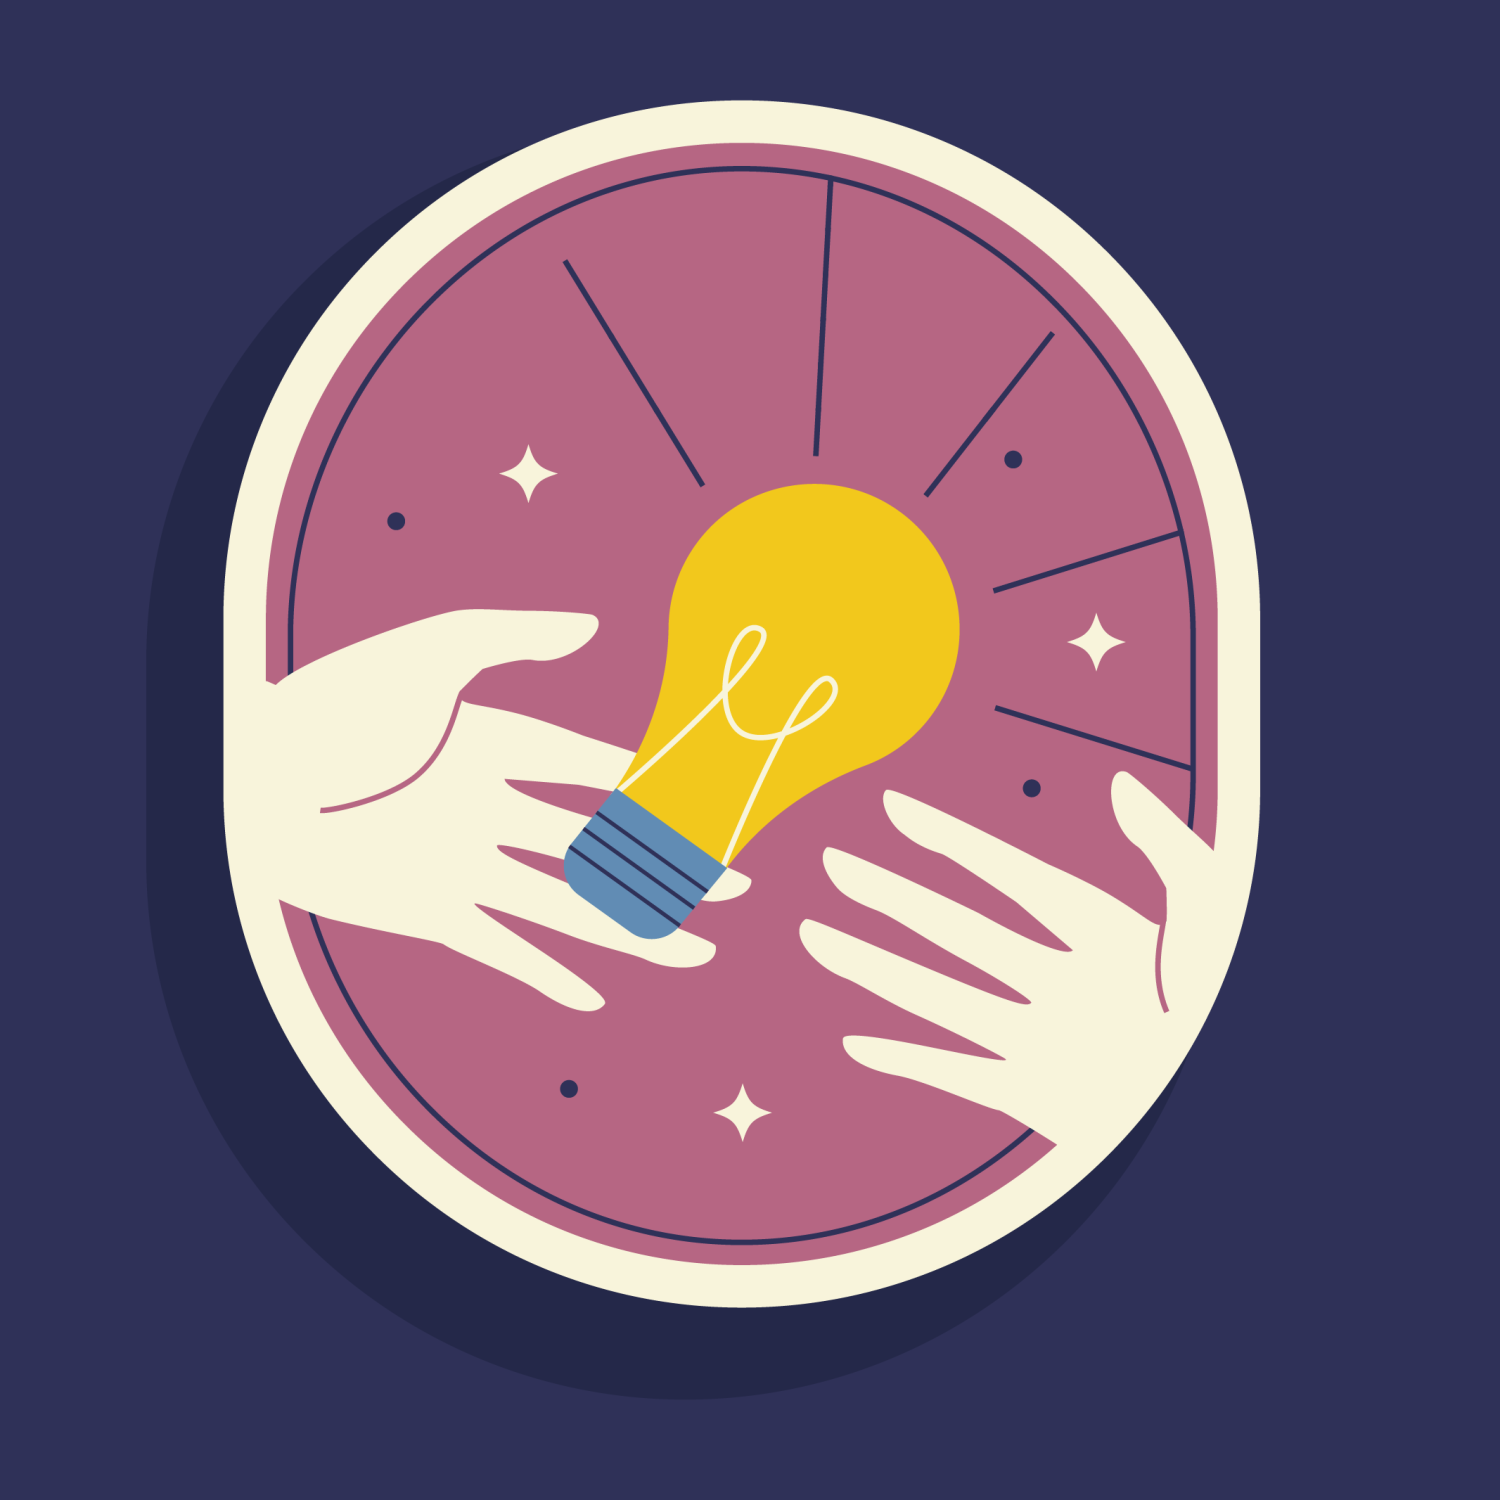 home expense that waste money illustration open hands under a yellow light bulb on purple background